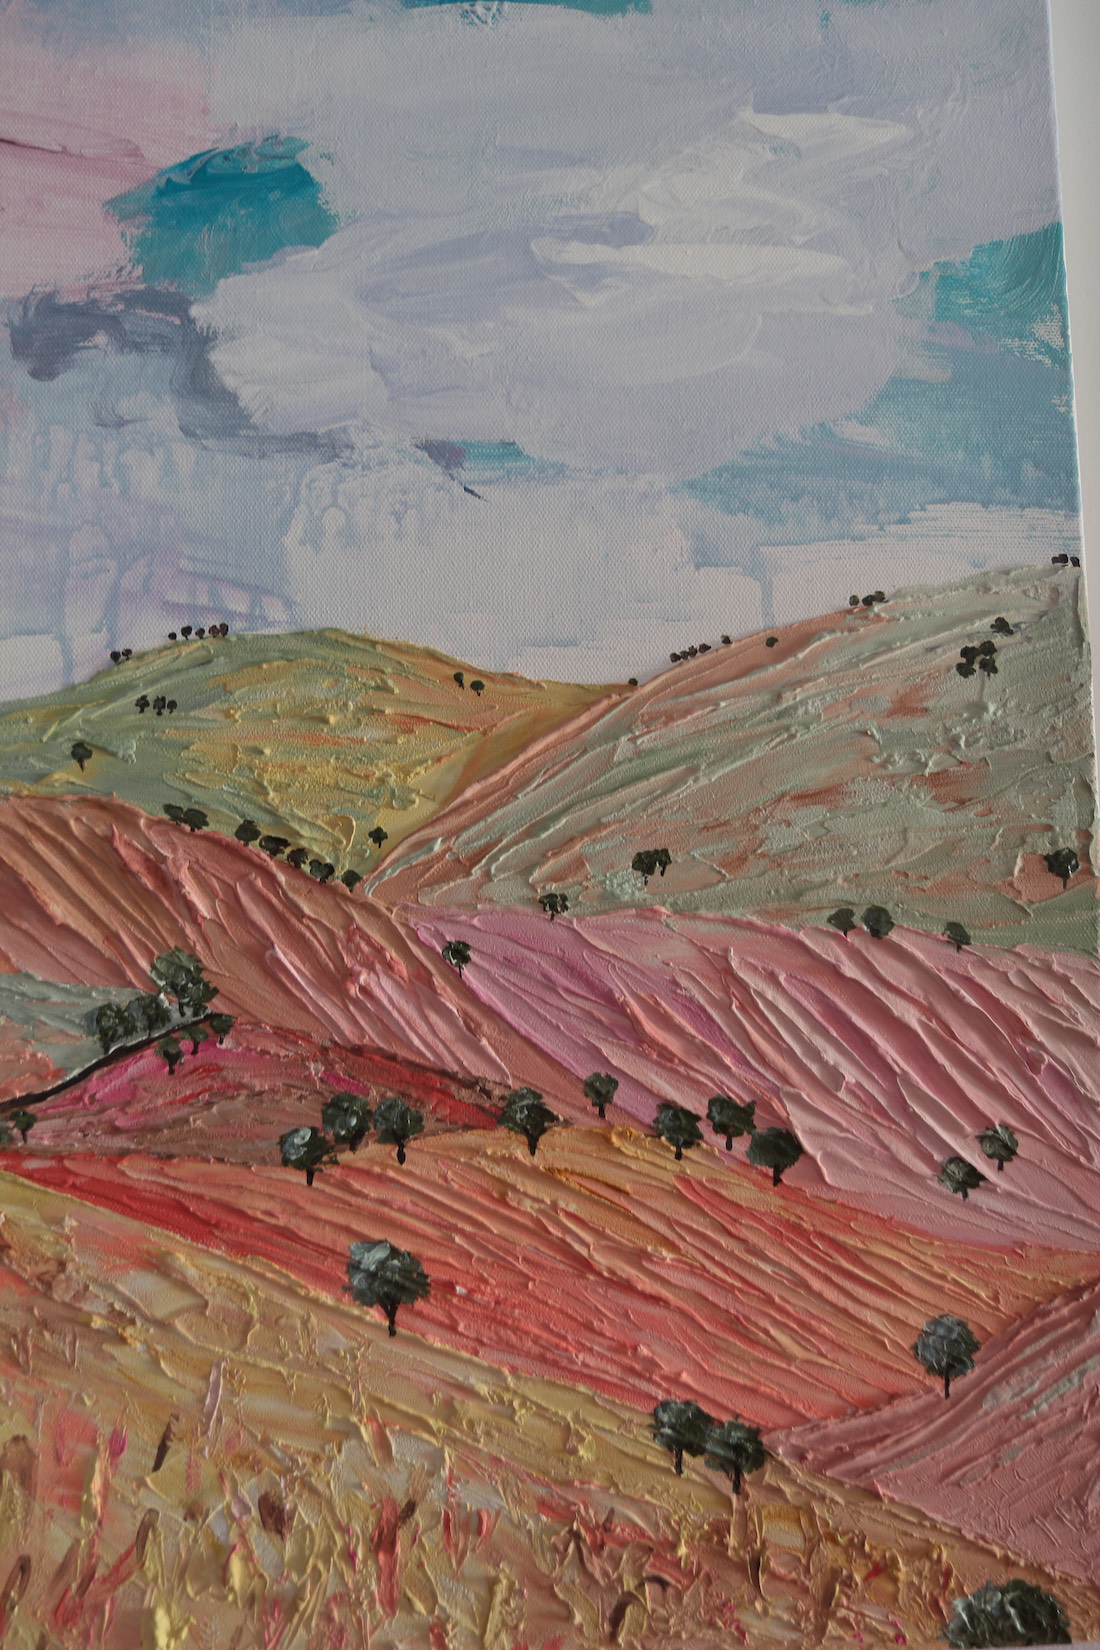 Landscape artwork with textural elements from Kelsie Rose Creative